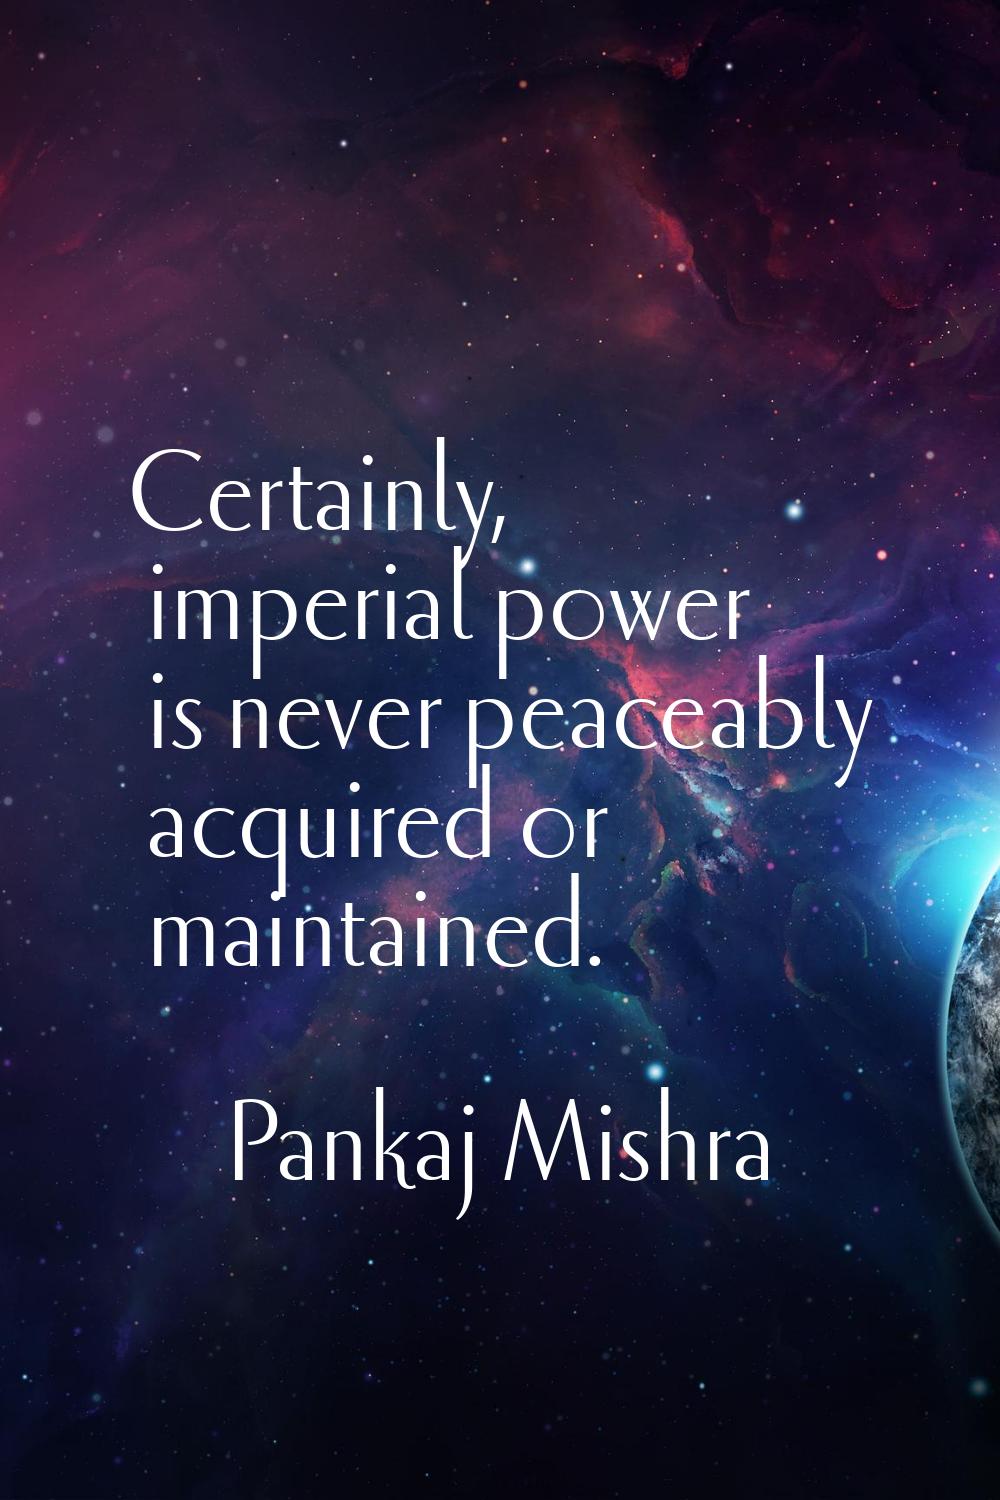 Certainly, imperial power is never peaceably acquired or maintained.